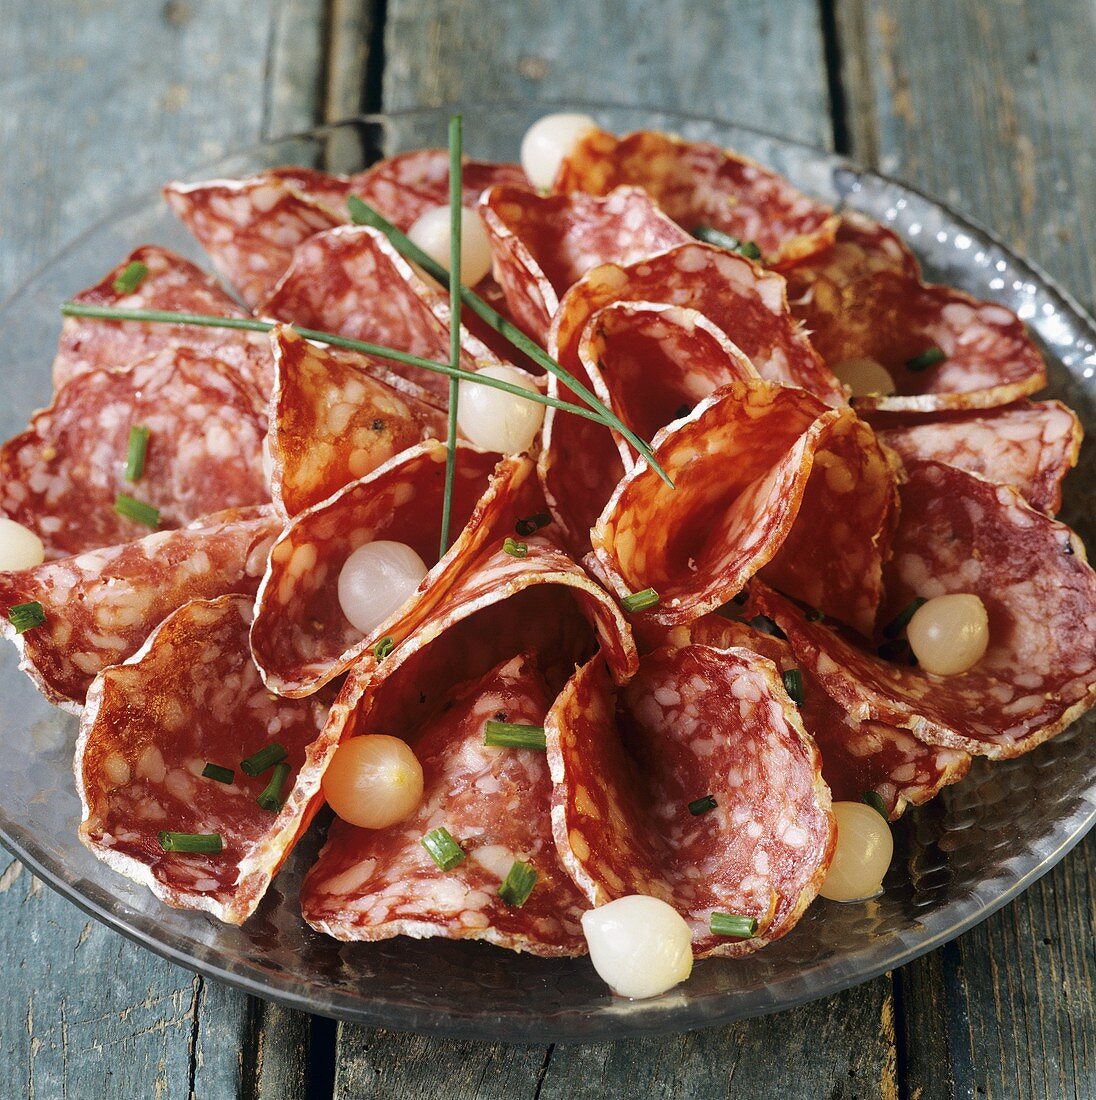 Sliced salami served with pearl onions